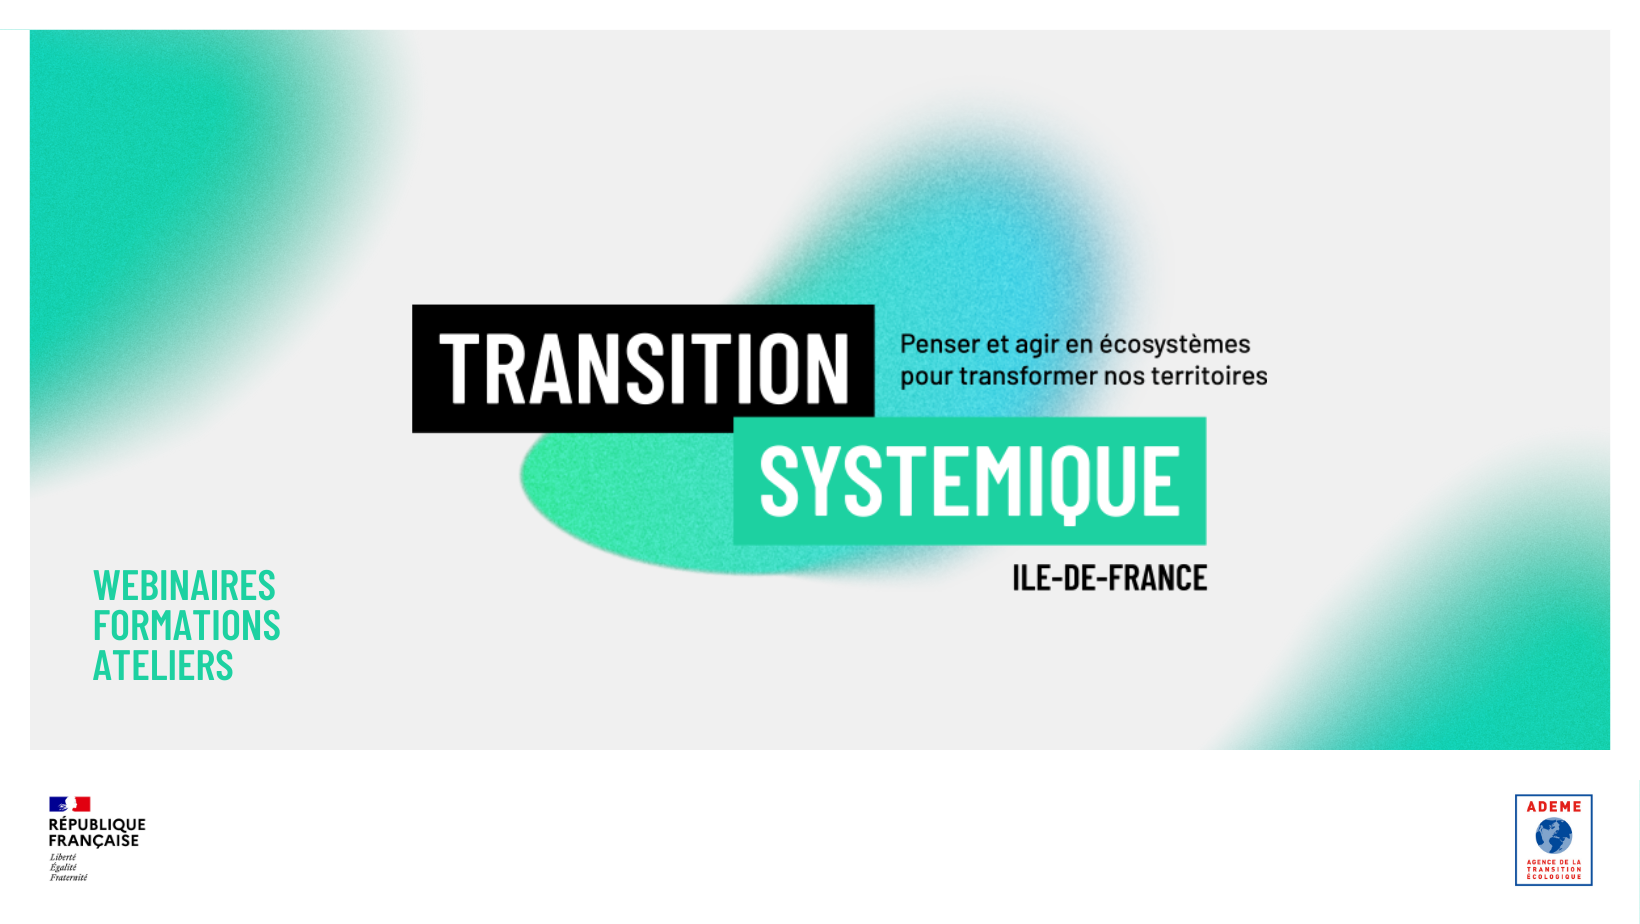 Transition_systemique.png
